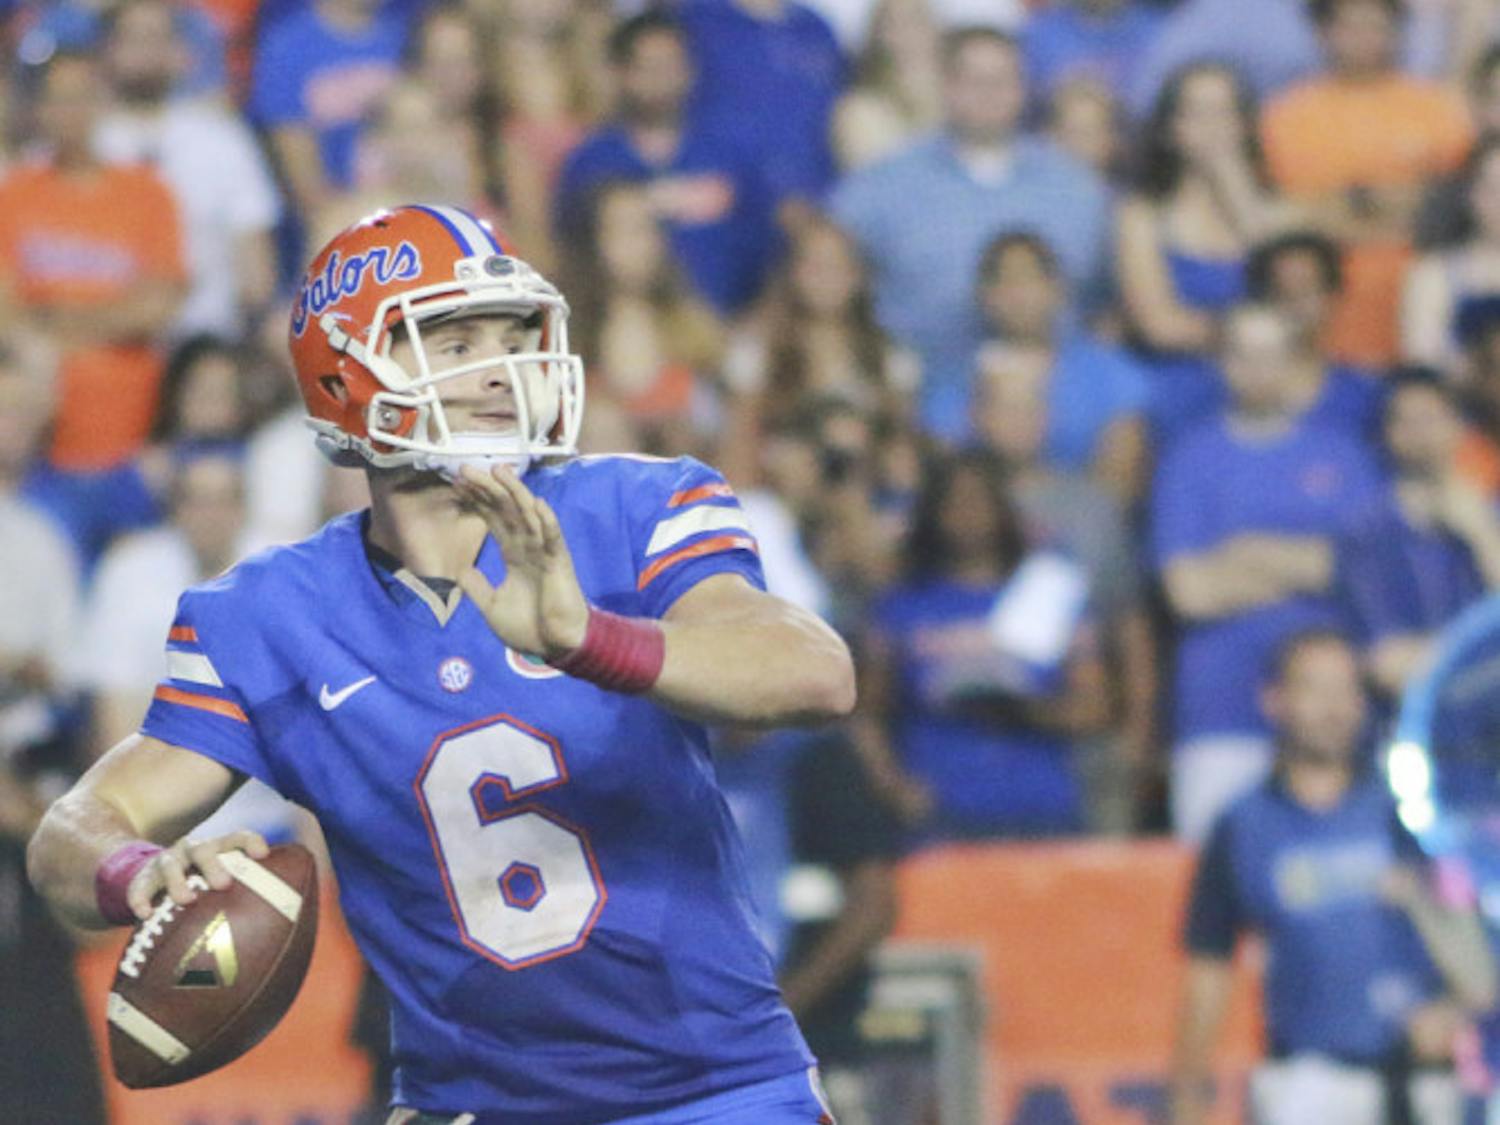 Jeff Driskel attempts a pass during UF's 30-27 loss to LSU on Saturday at Ben Hill Griffin Stadium.